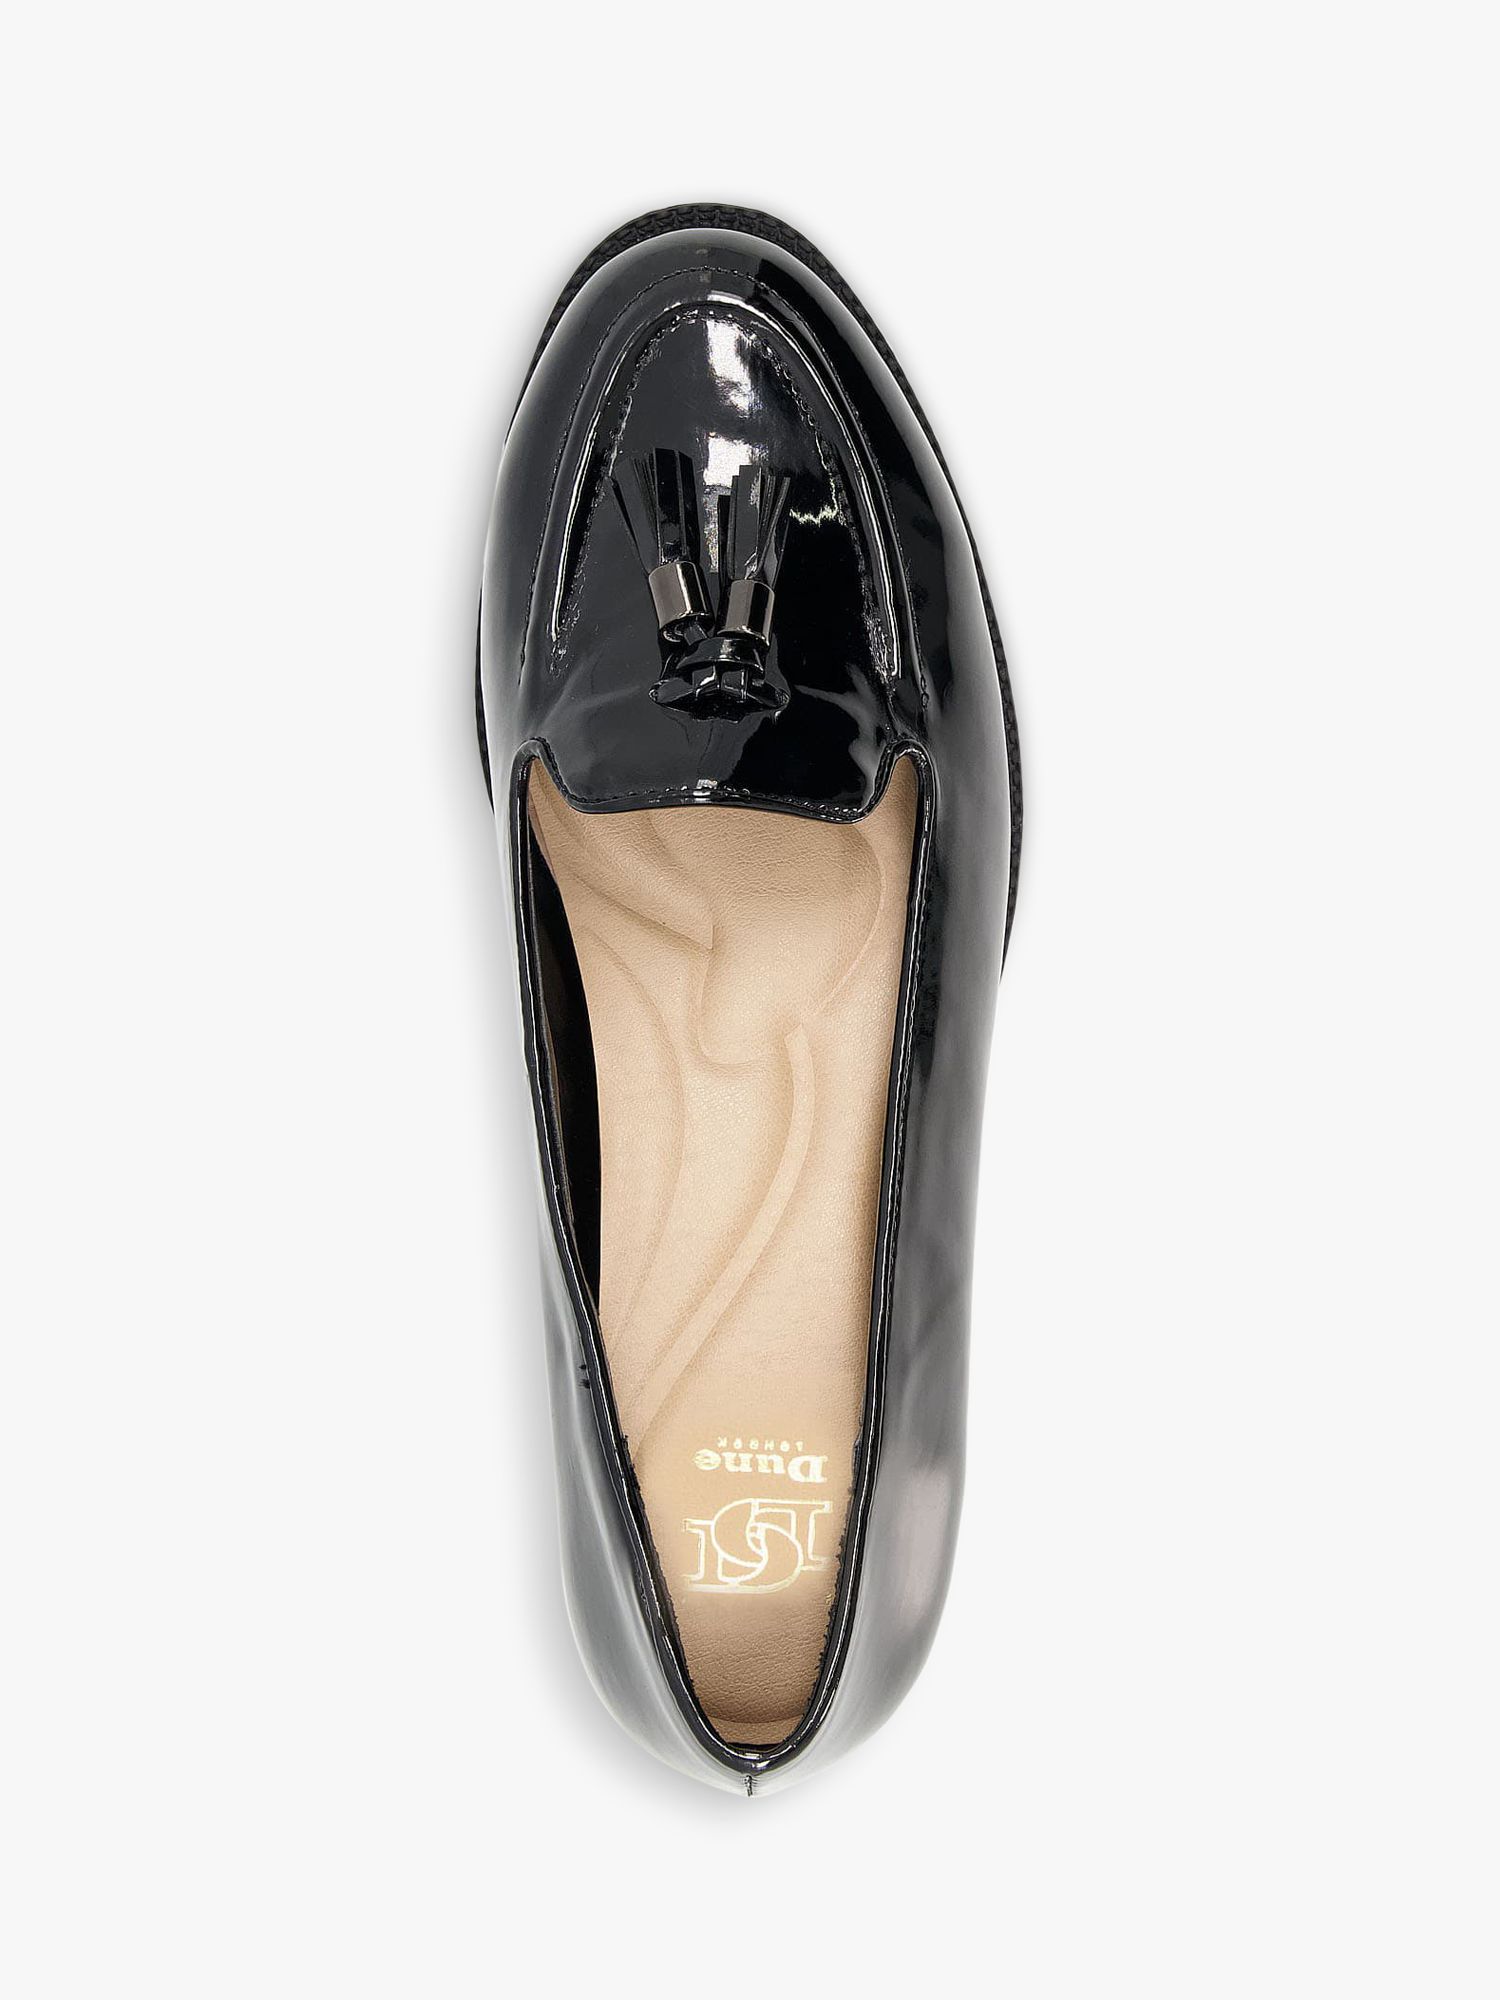 Dune Wide Fit Global Loafers, Black at John Lewis & Partners